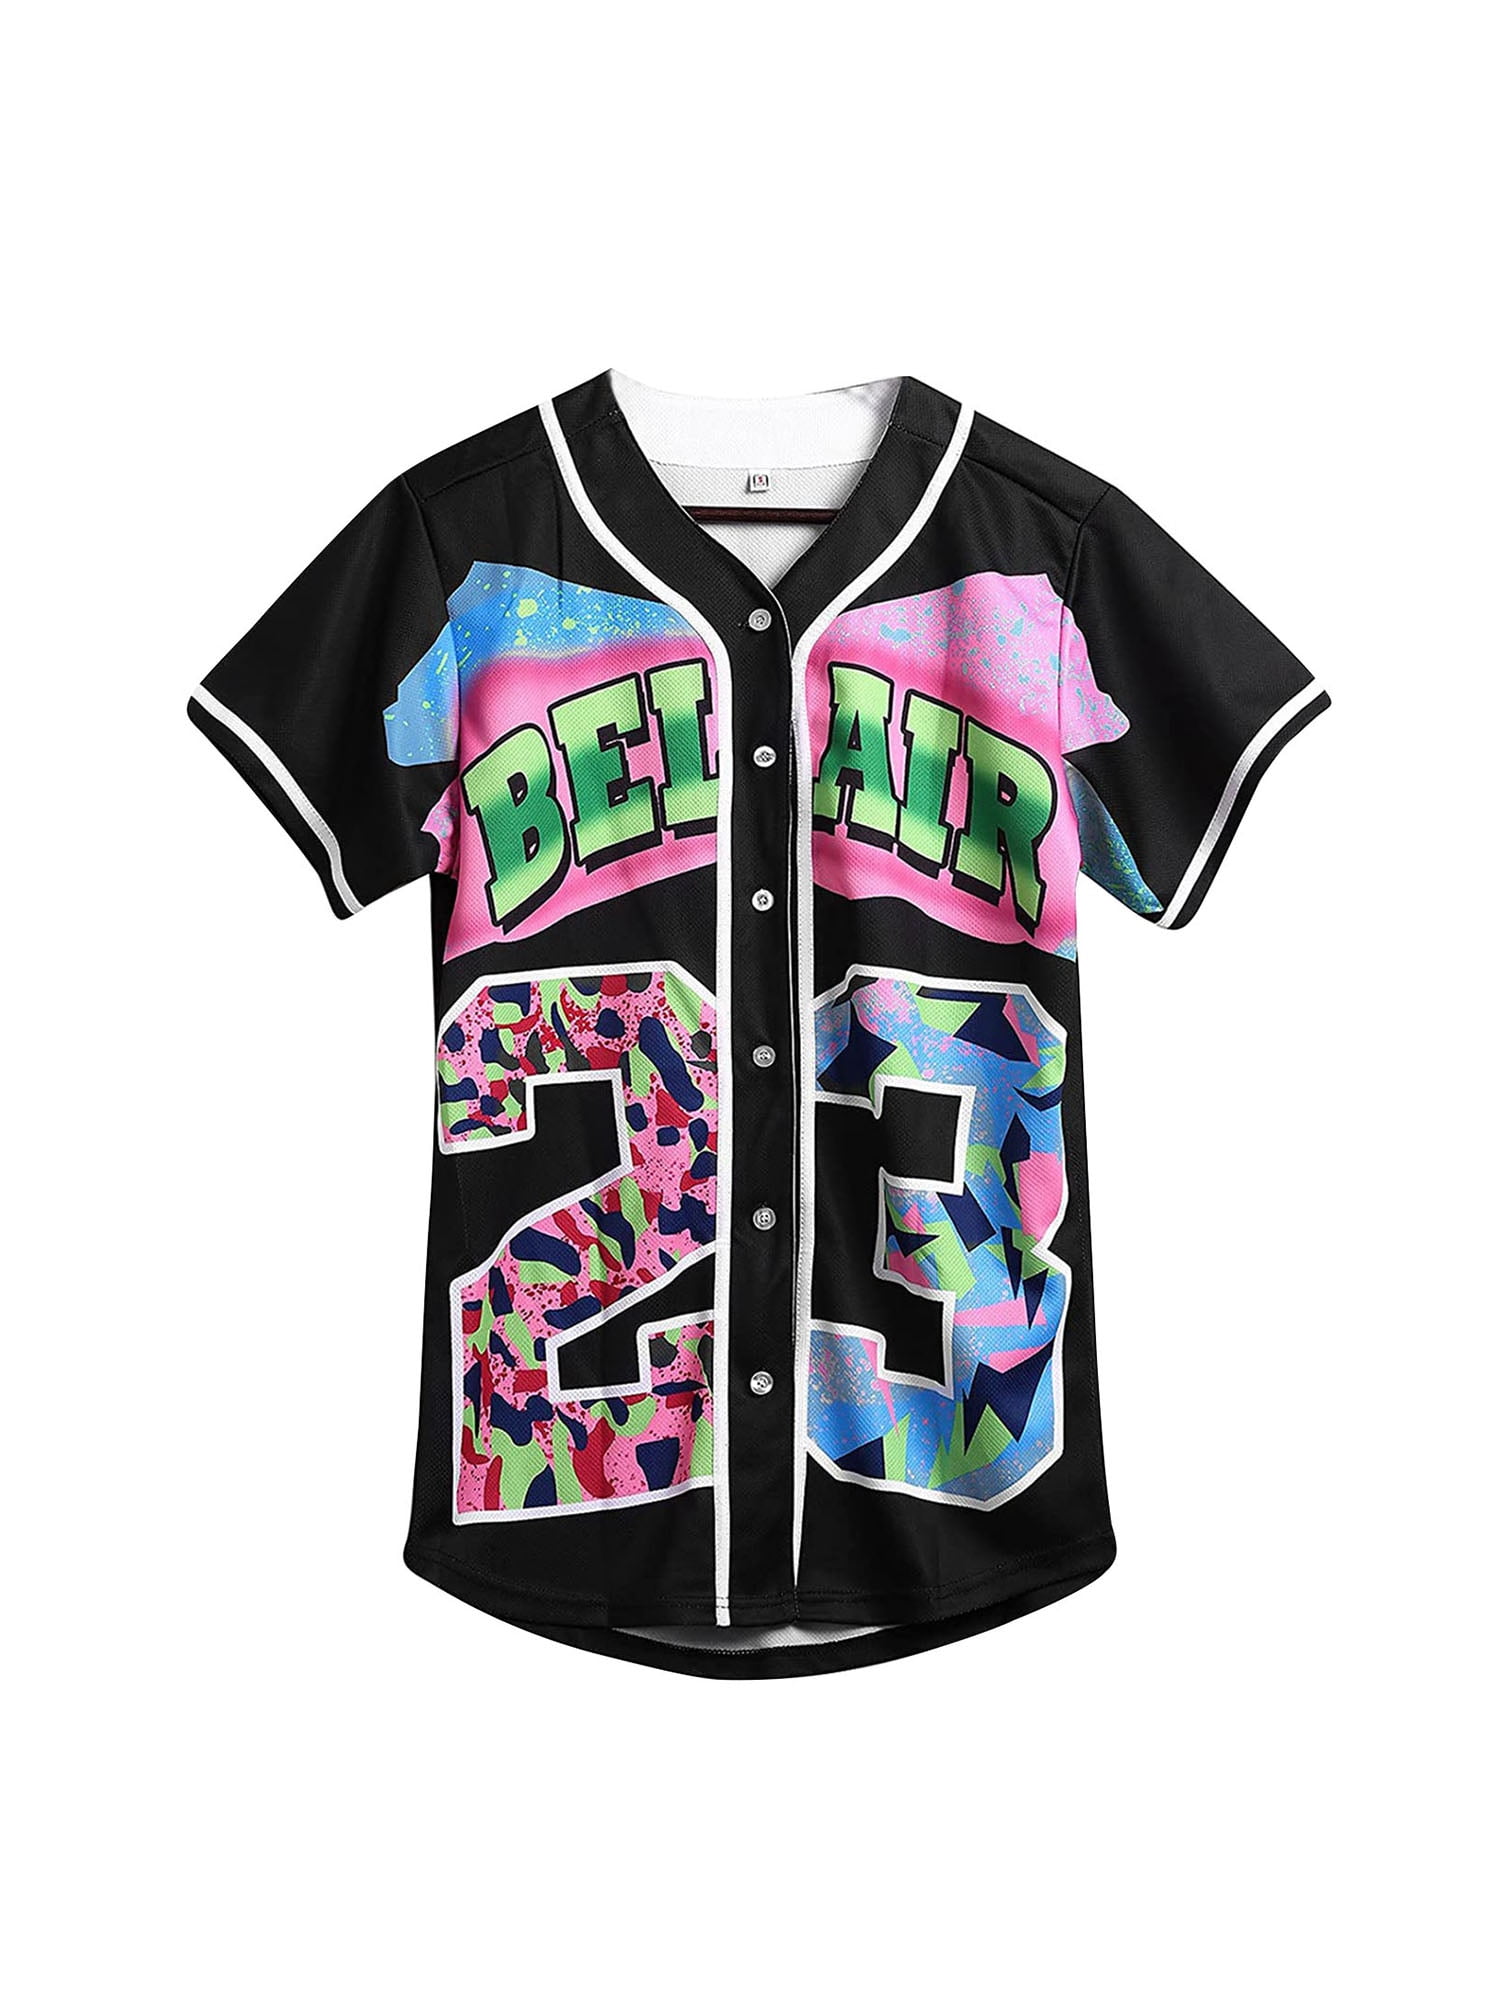 Available in 23 Colors in Youth & Adult Sizes 2-Color Shoulder Baseball/Softball Athletic Sports Uniform Jersey/Top 